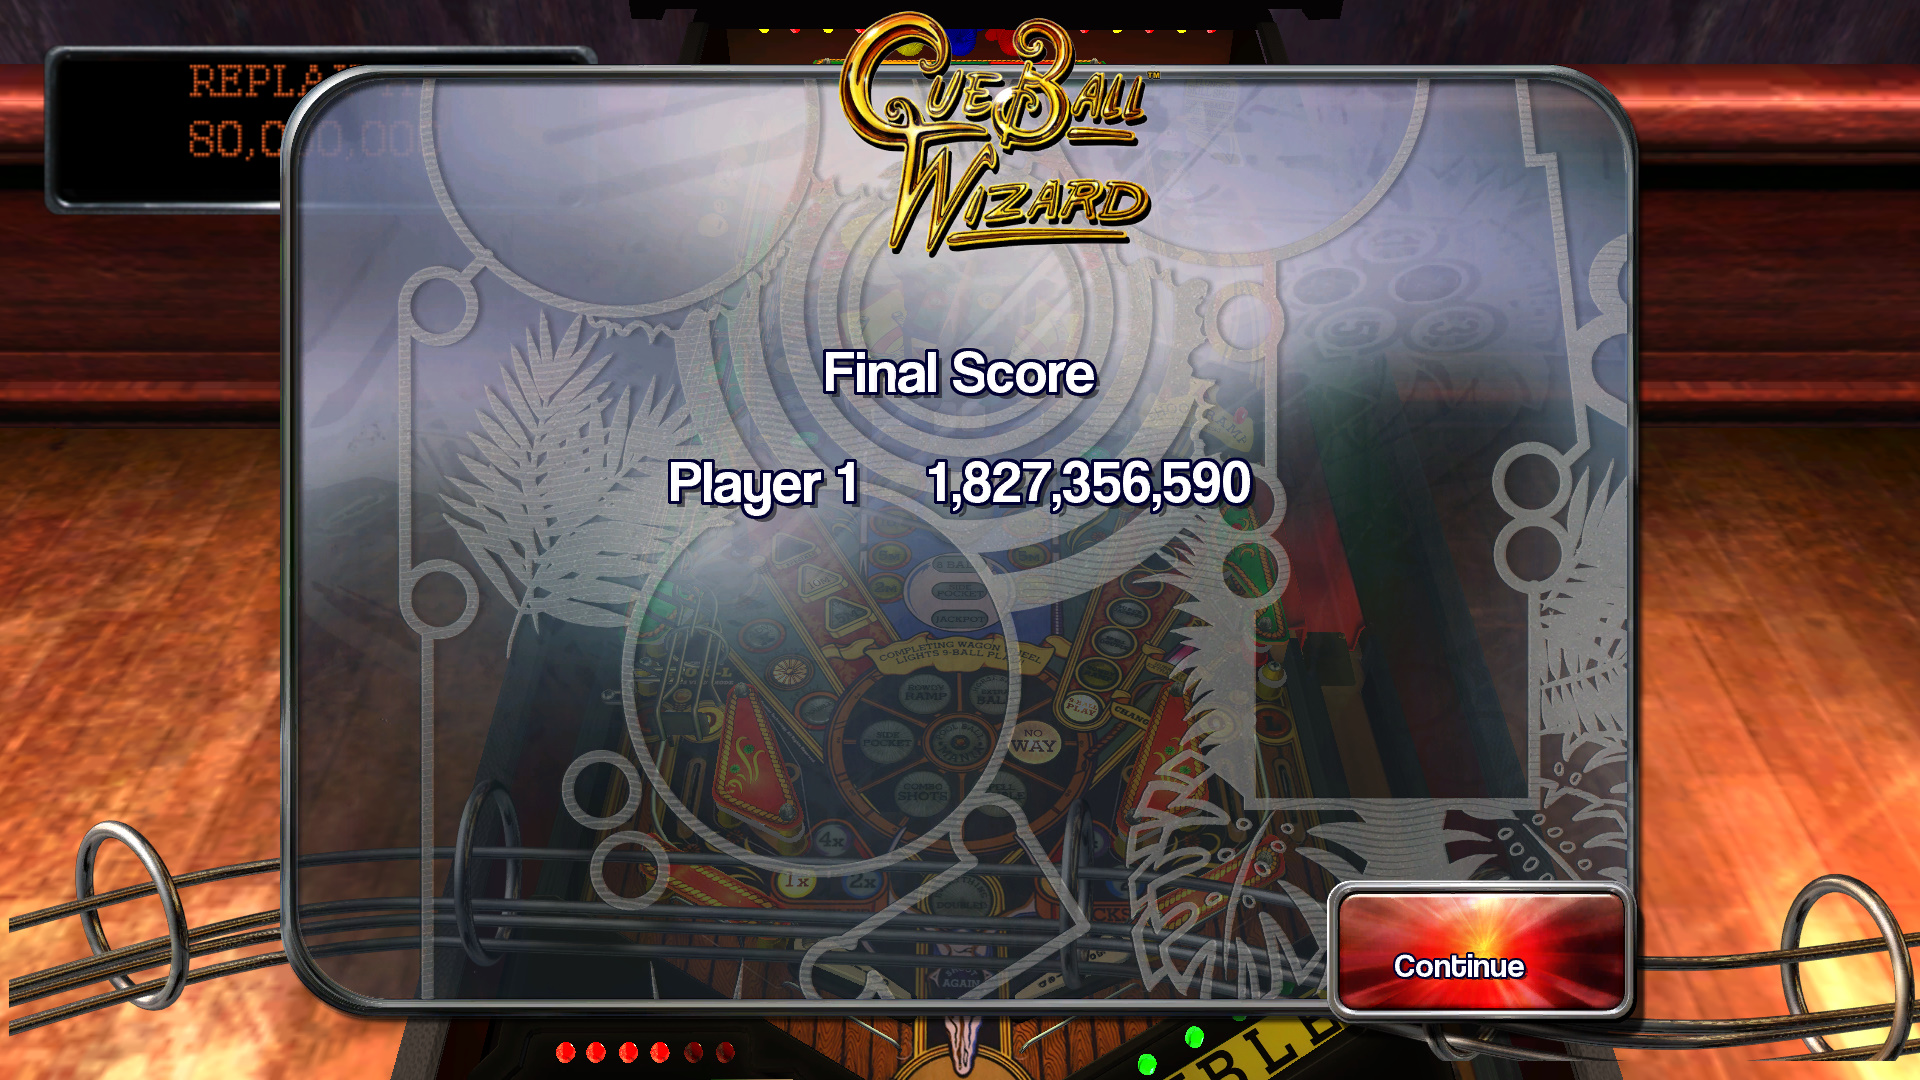 TheTrickster: Pinball Arcade: Cue Ball Wizard (PC) 1,827,356,590 points on 2015-11-13 17:22:17